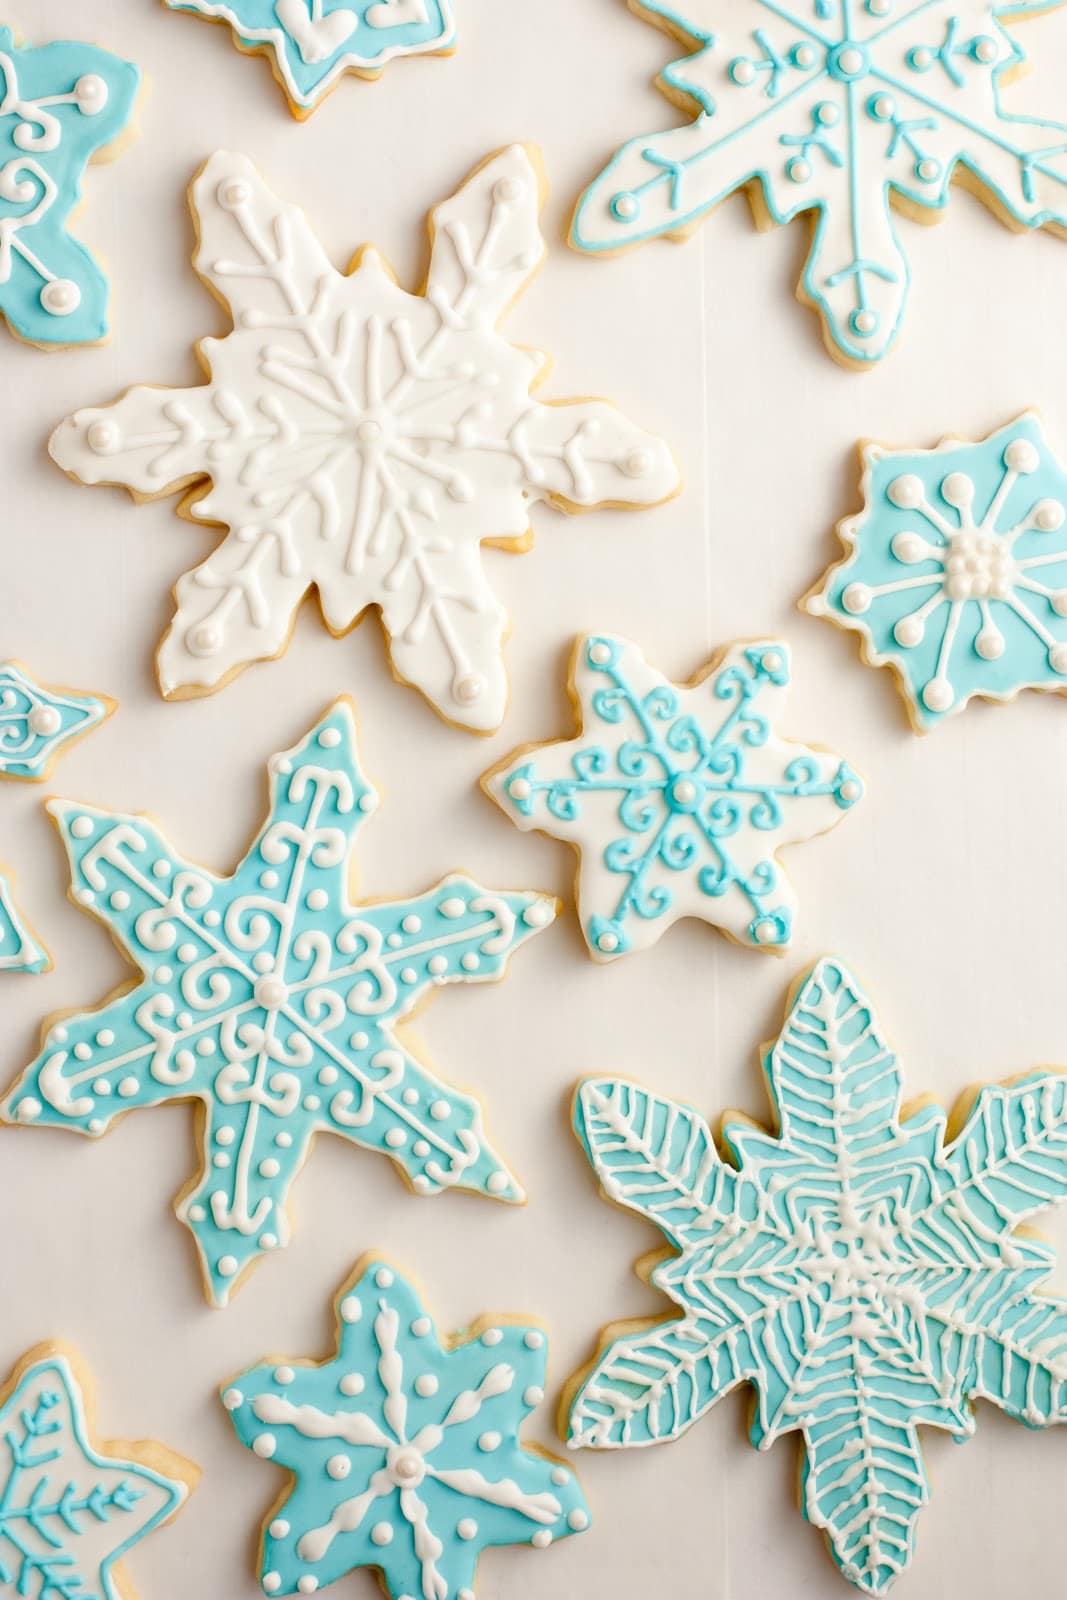 Iced Sugar Cookies - Cooking Classy